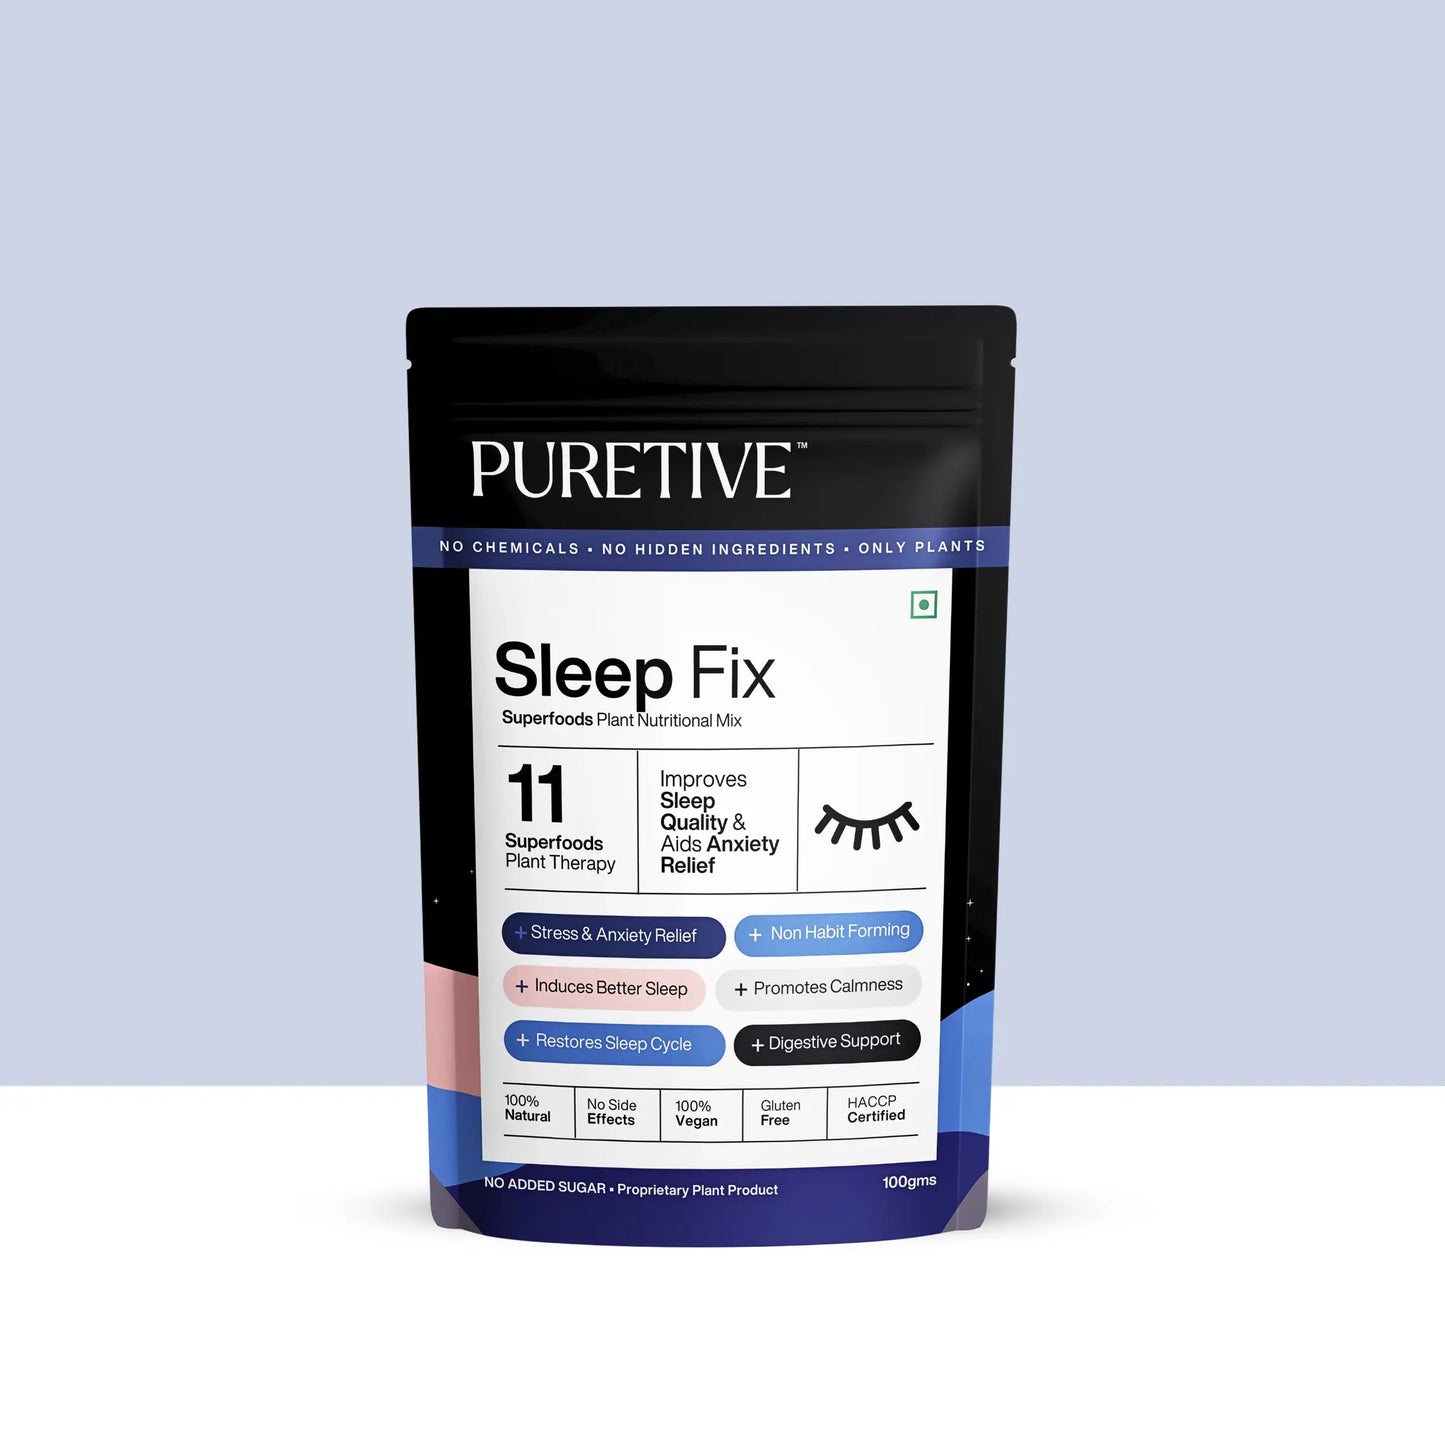 Puretive's Sleep Fix Nutrition Mix  with 11 100% Pure superfoods, carefully designed to promote better sleep by addressing stress, hormone balance, and digestion, ultimately restoring your sleep cycle & improving your overall well-being. 